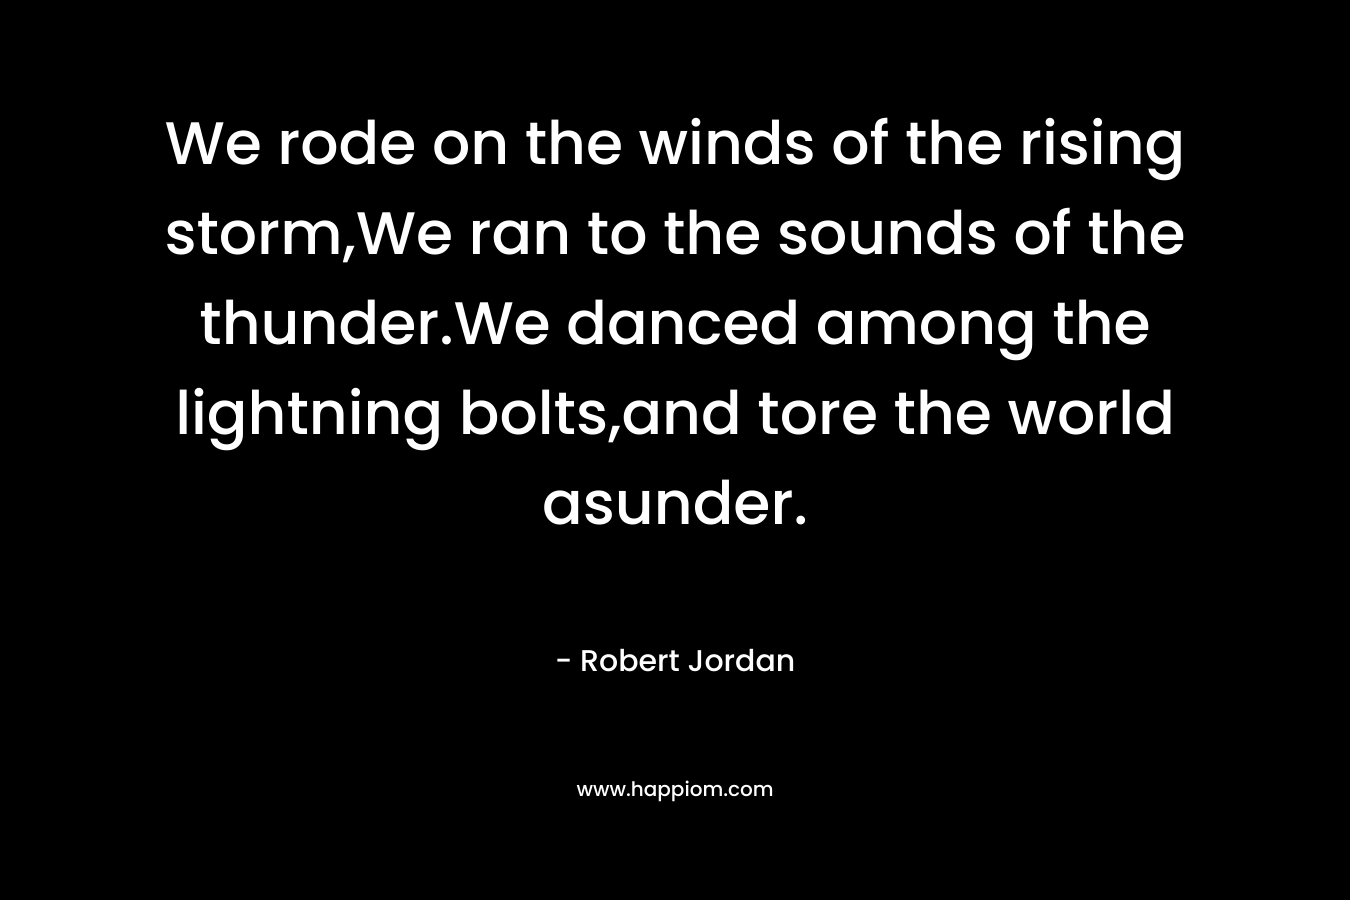 We rode on the winds of the rising storm,We ran to the sounds of the thunder.We danced among the lightning bolts,and tore the world asunder. – Robert Jordan